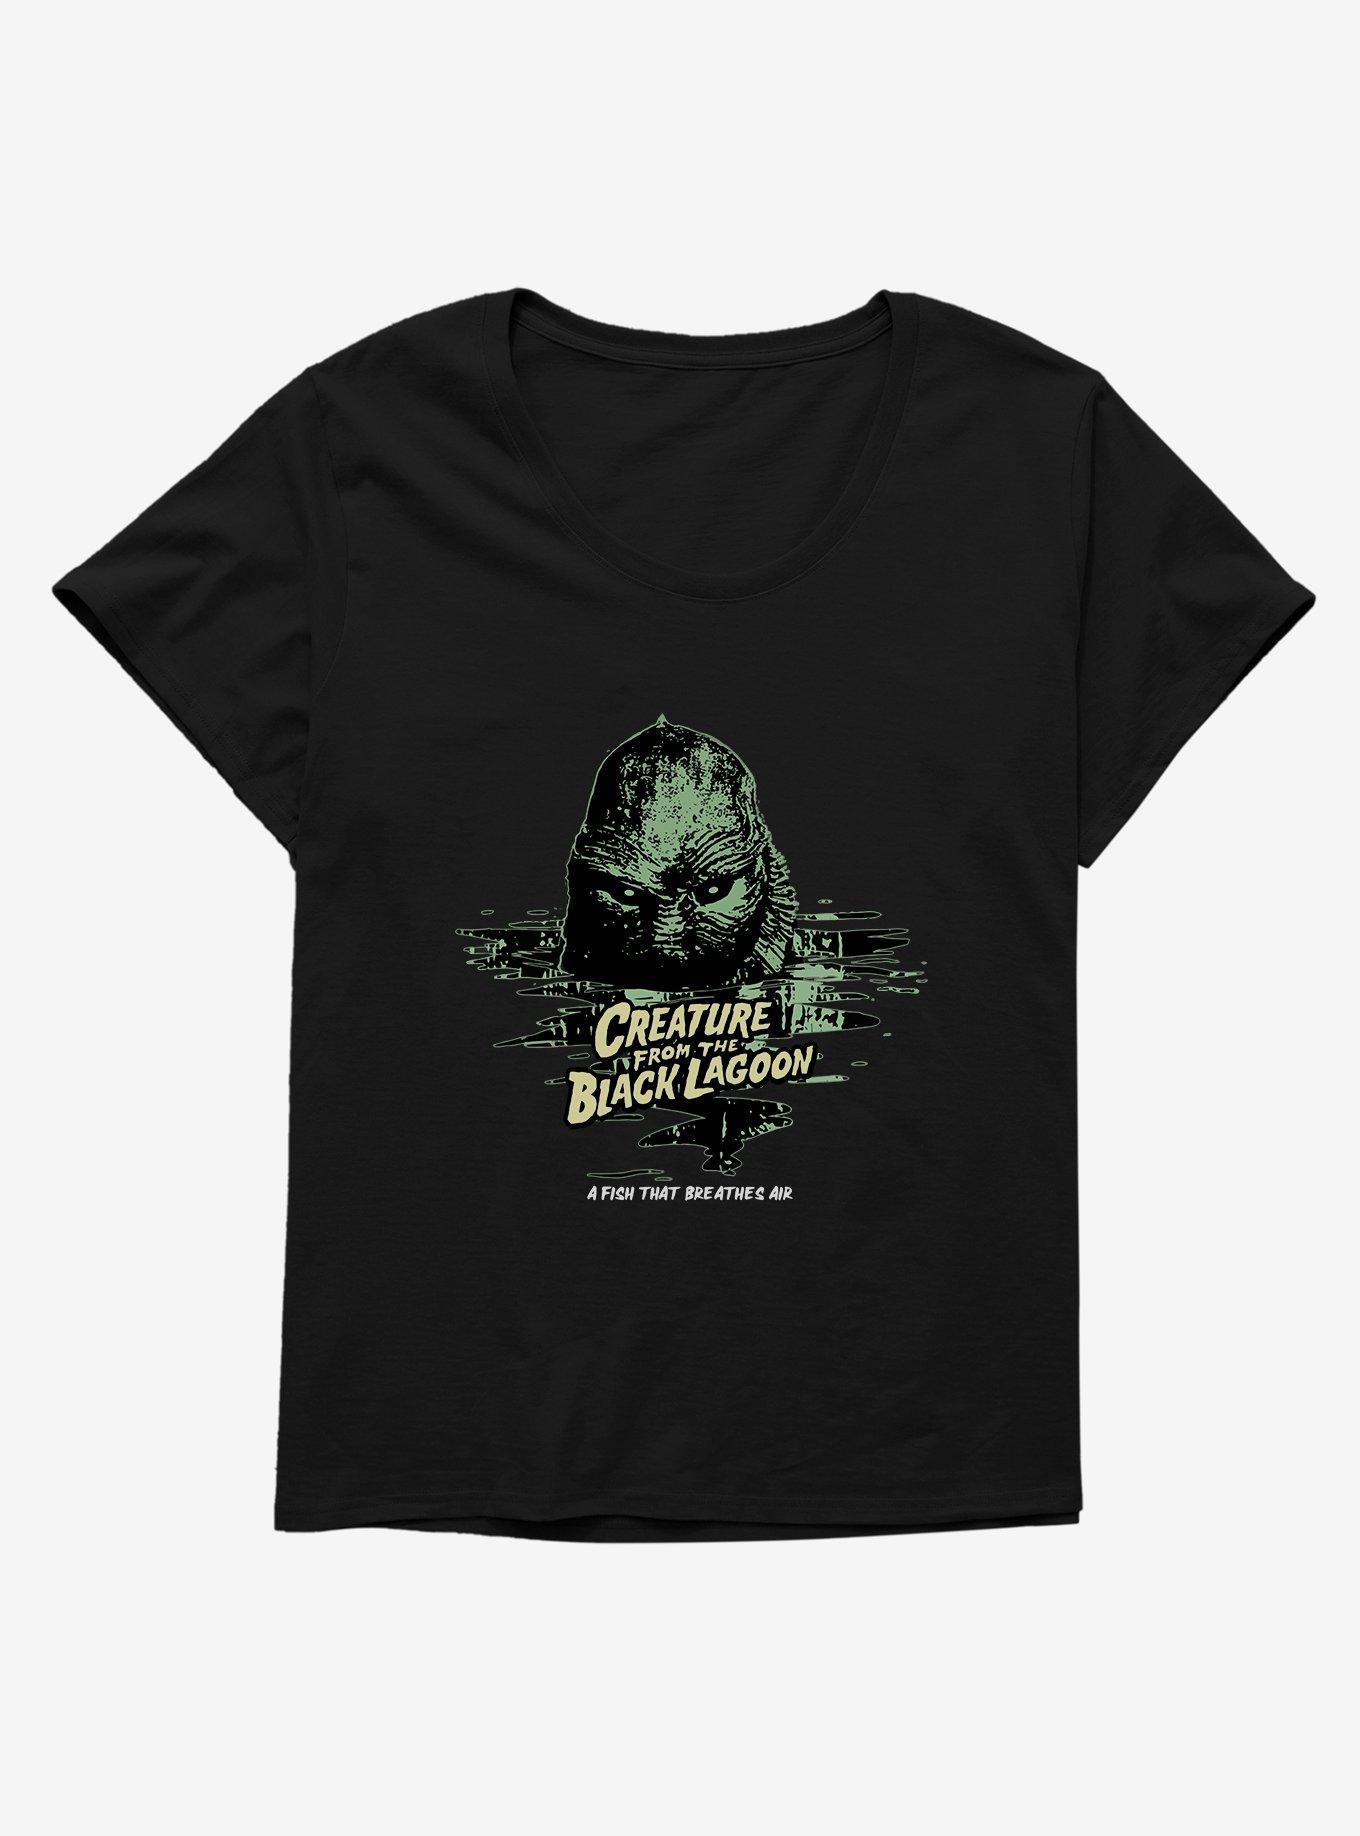 Creature From The Black Lagoon Fish That Breathes Air Girls T-Shirt Plus Size, BLACK, hi-res